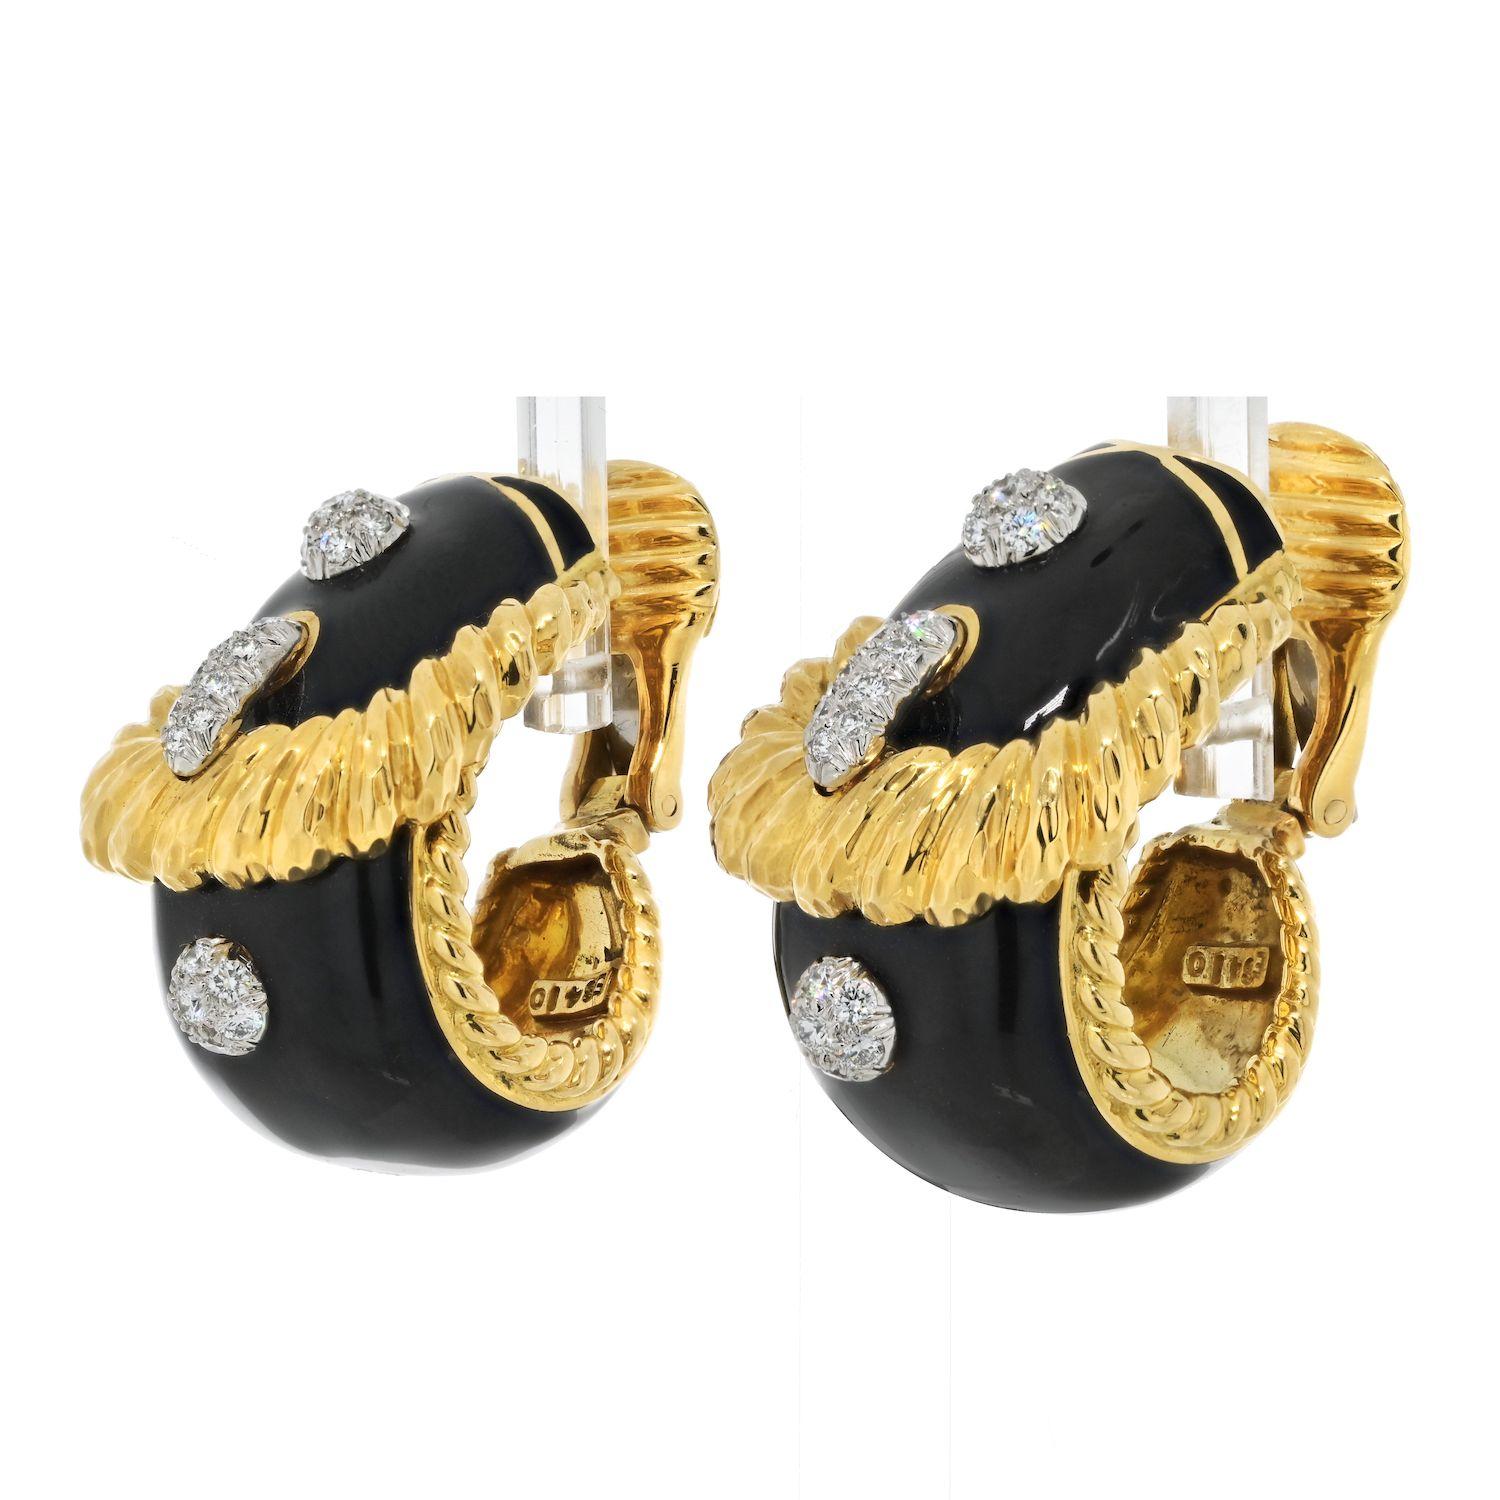 Introducing a striking pair of David Webb signature buckle design earrings, exuding a bold and captivating presence. These unique earrings are crafted as clip-ons, ensuring ease of wear for those without pierced ears. The earrings feature a large